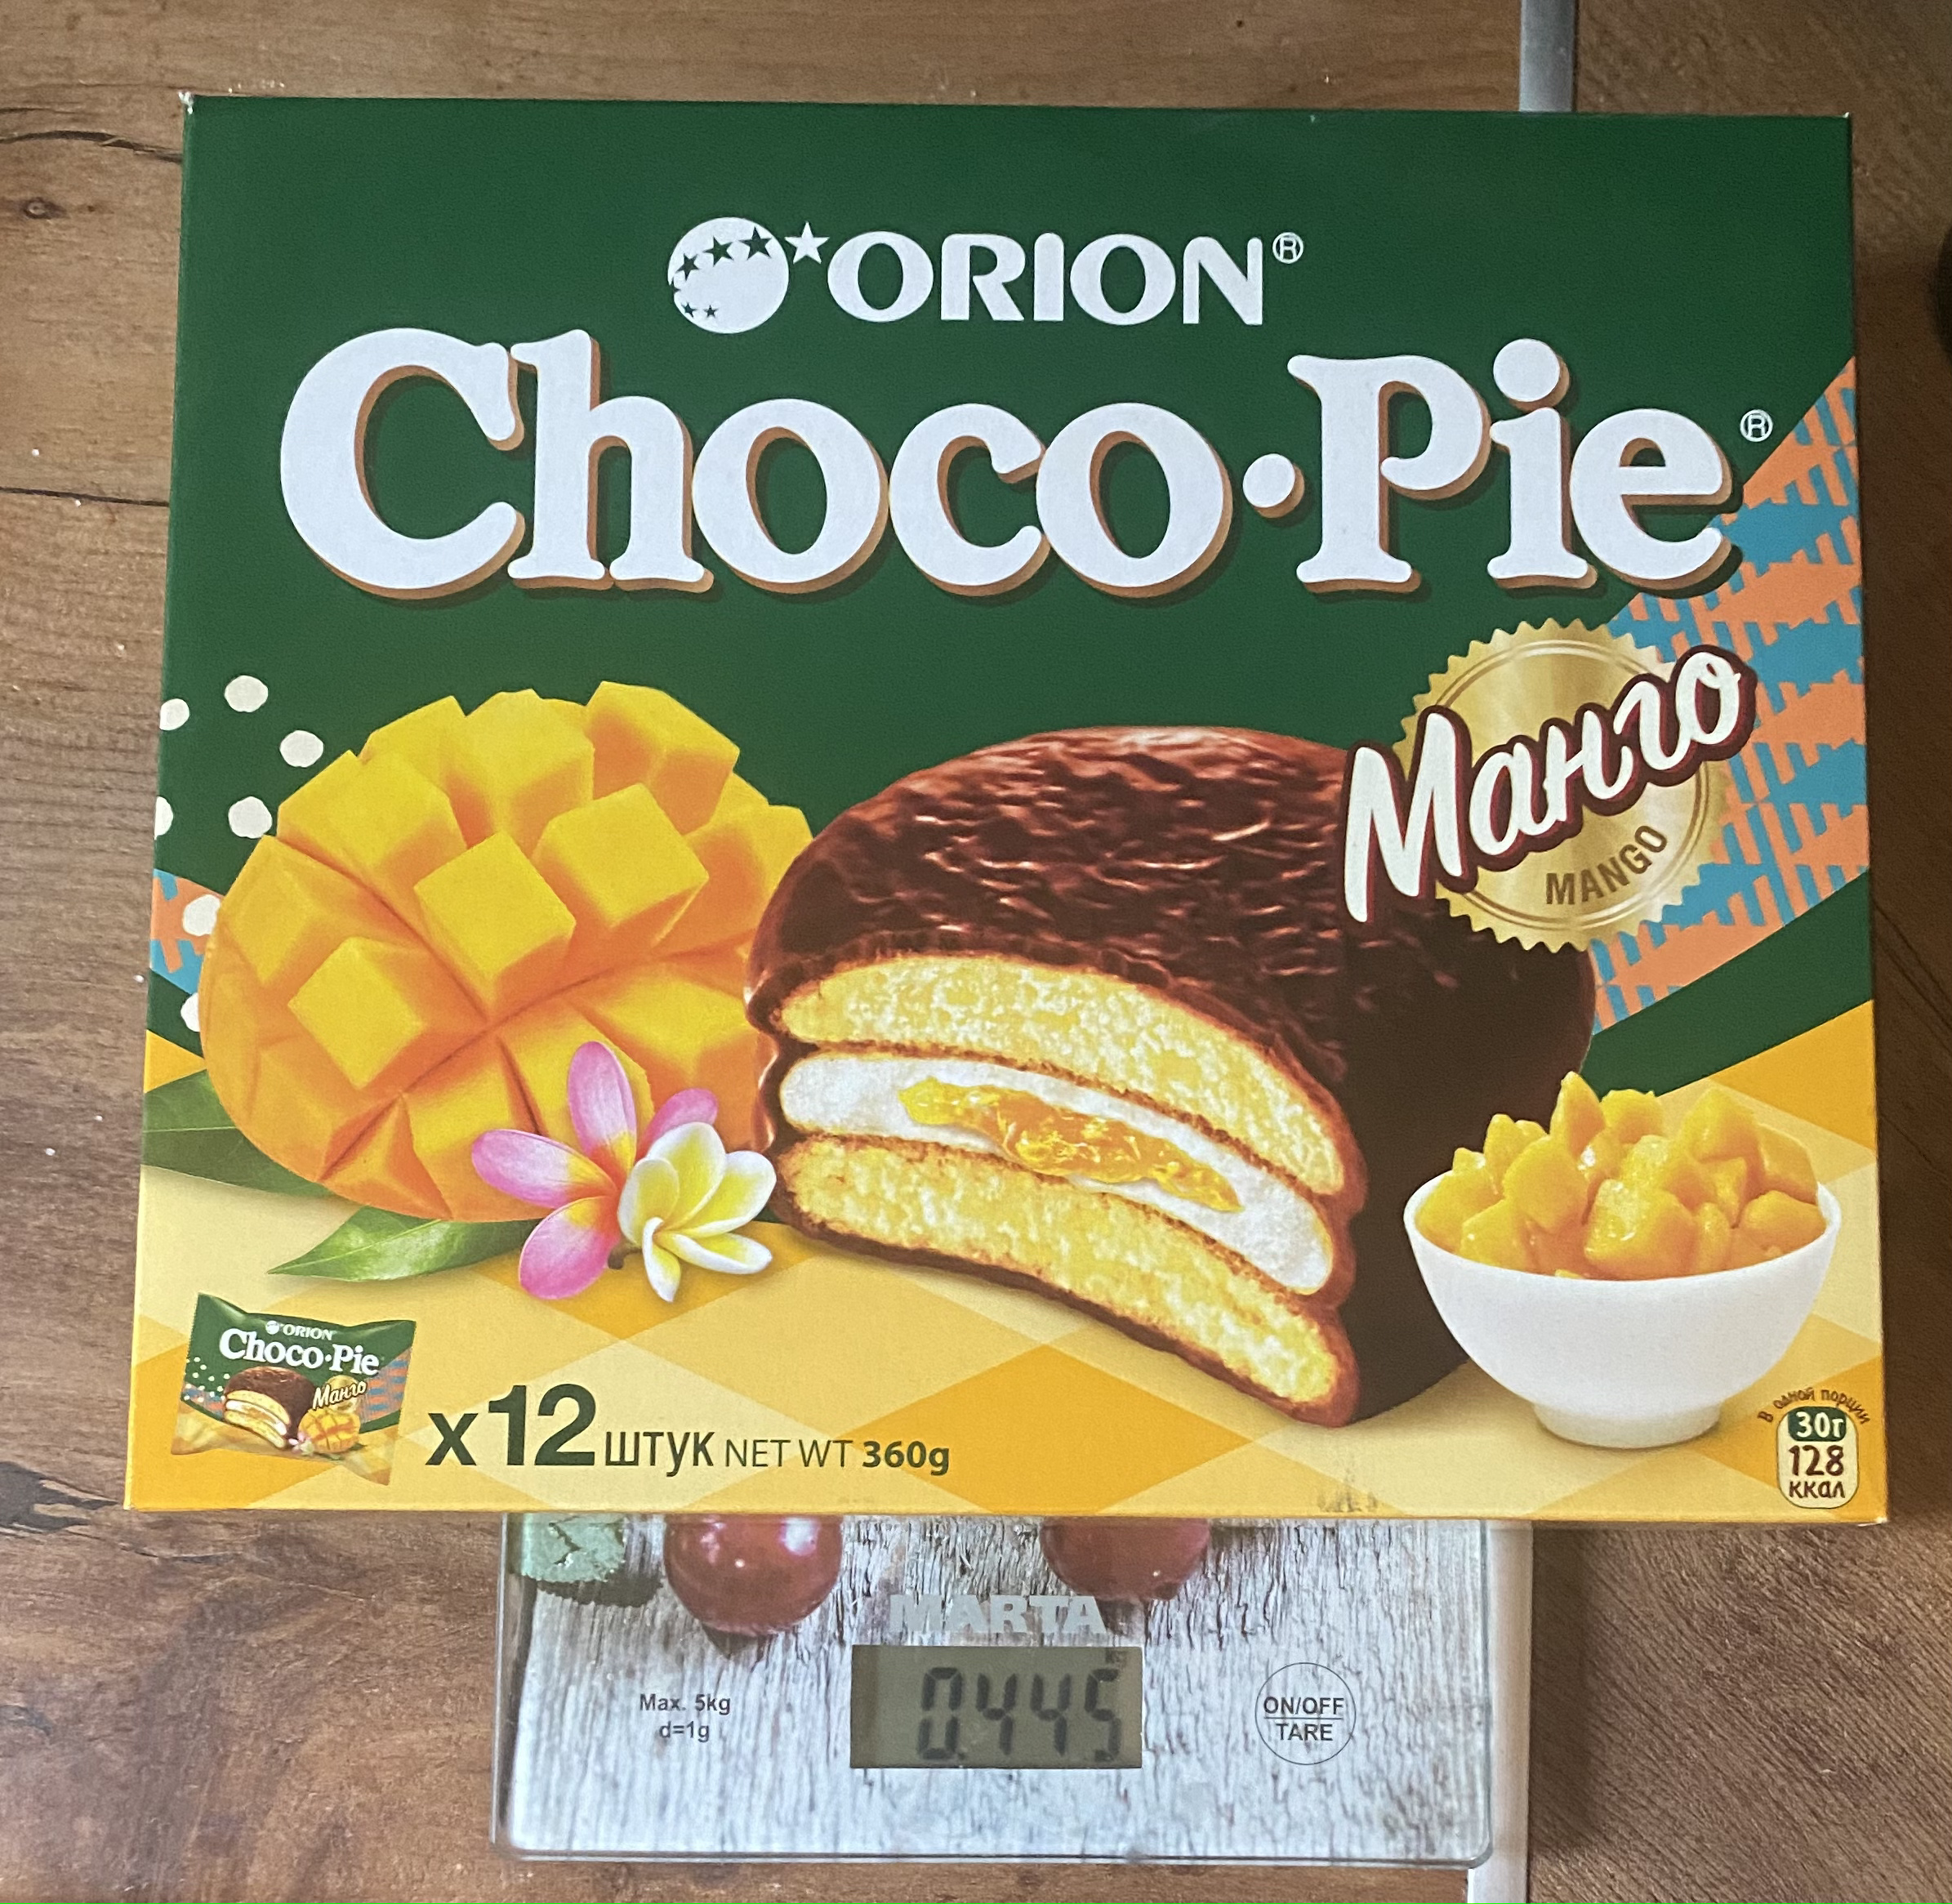 Weight of a box of Choco Pie cakes with mango